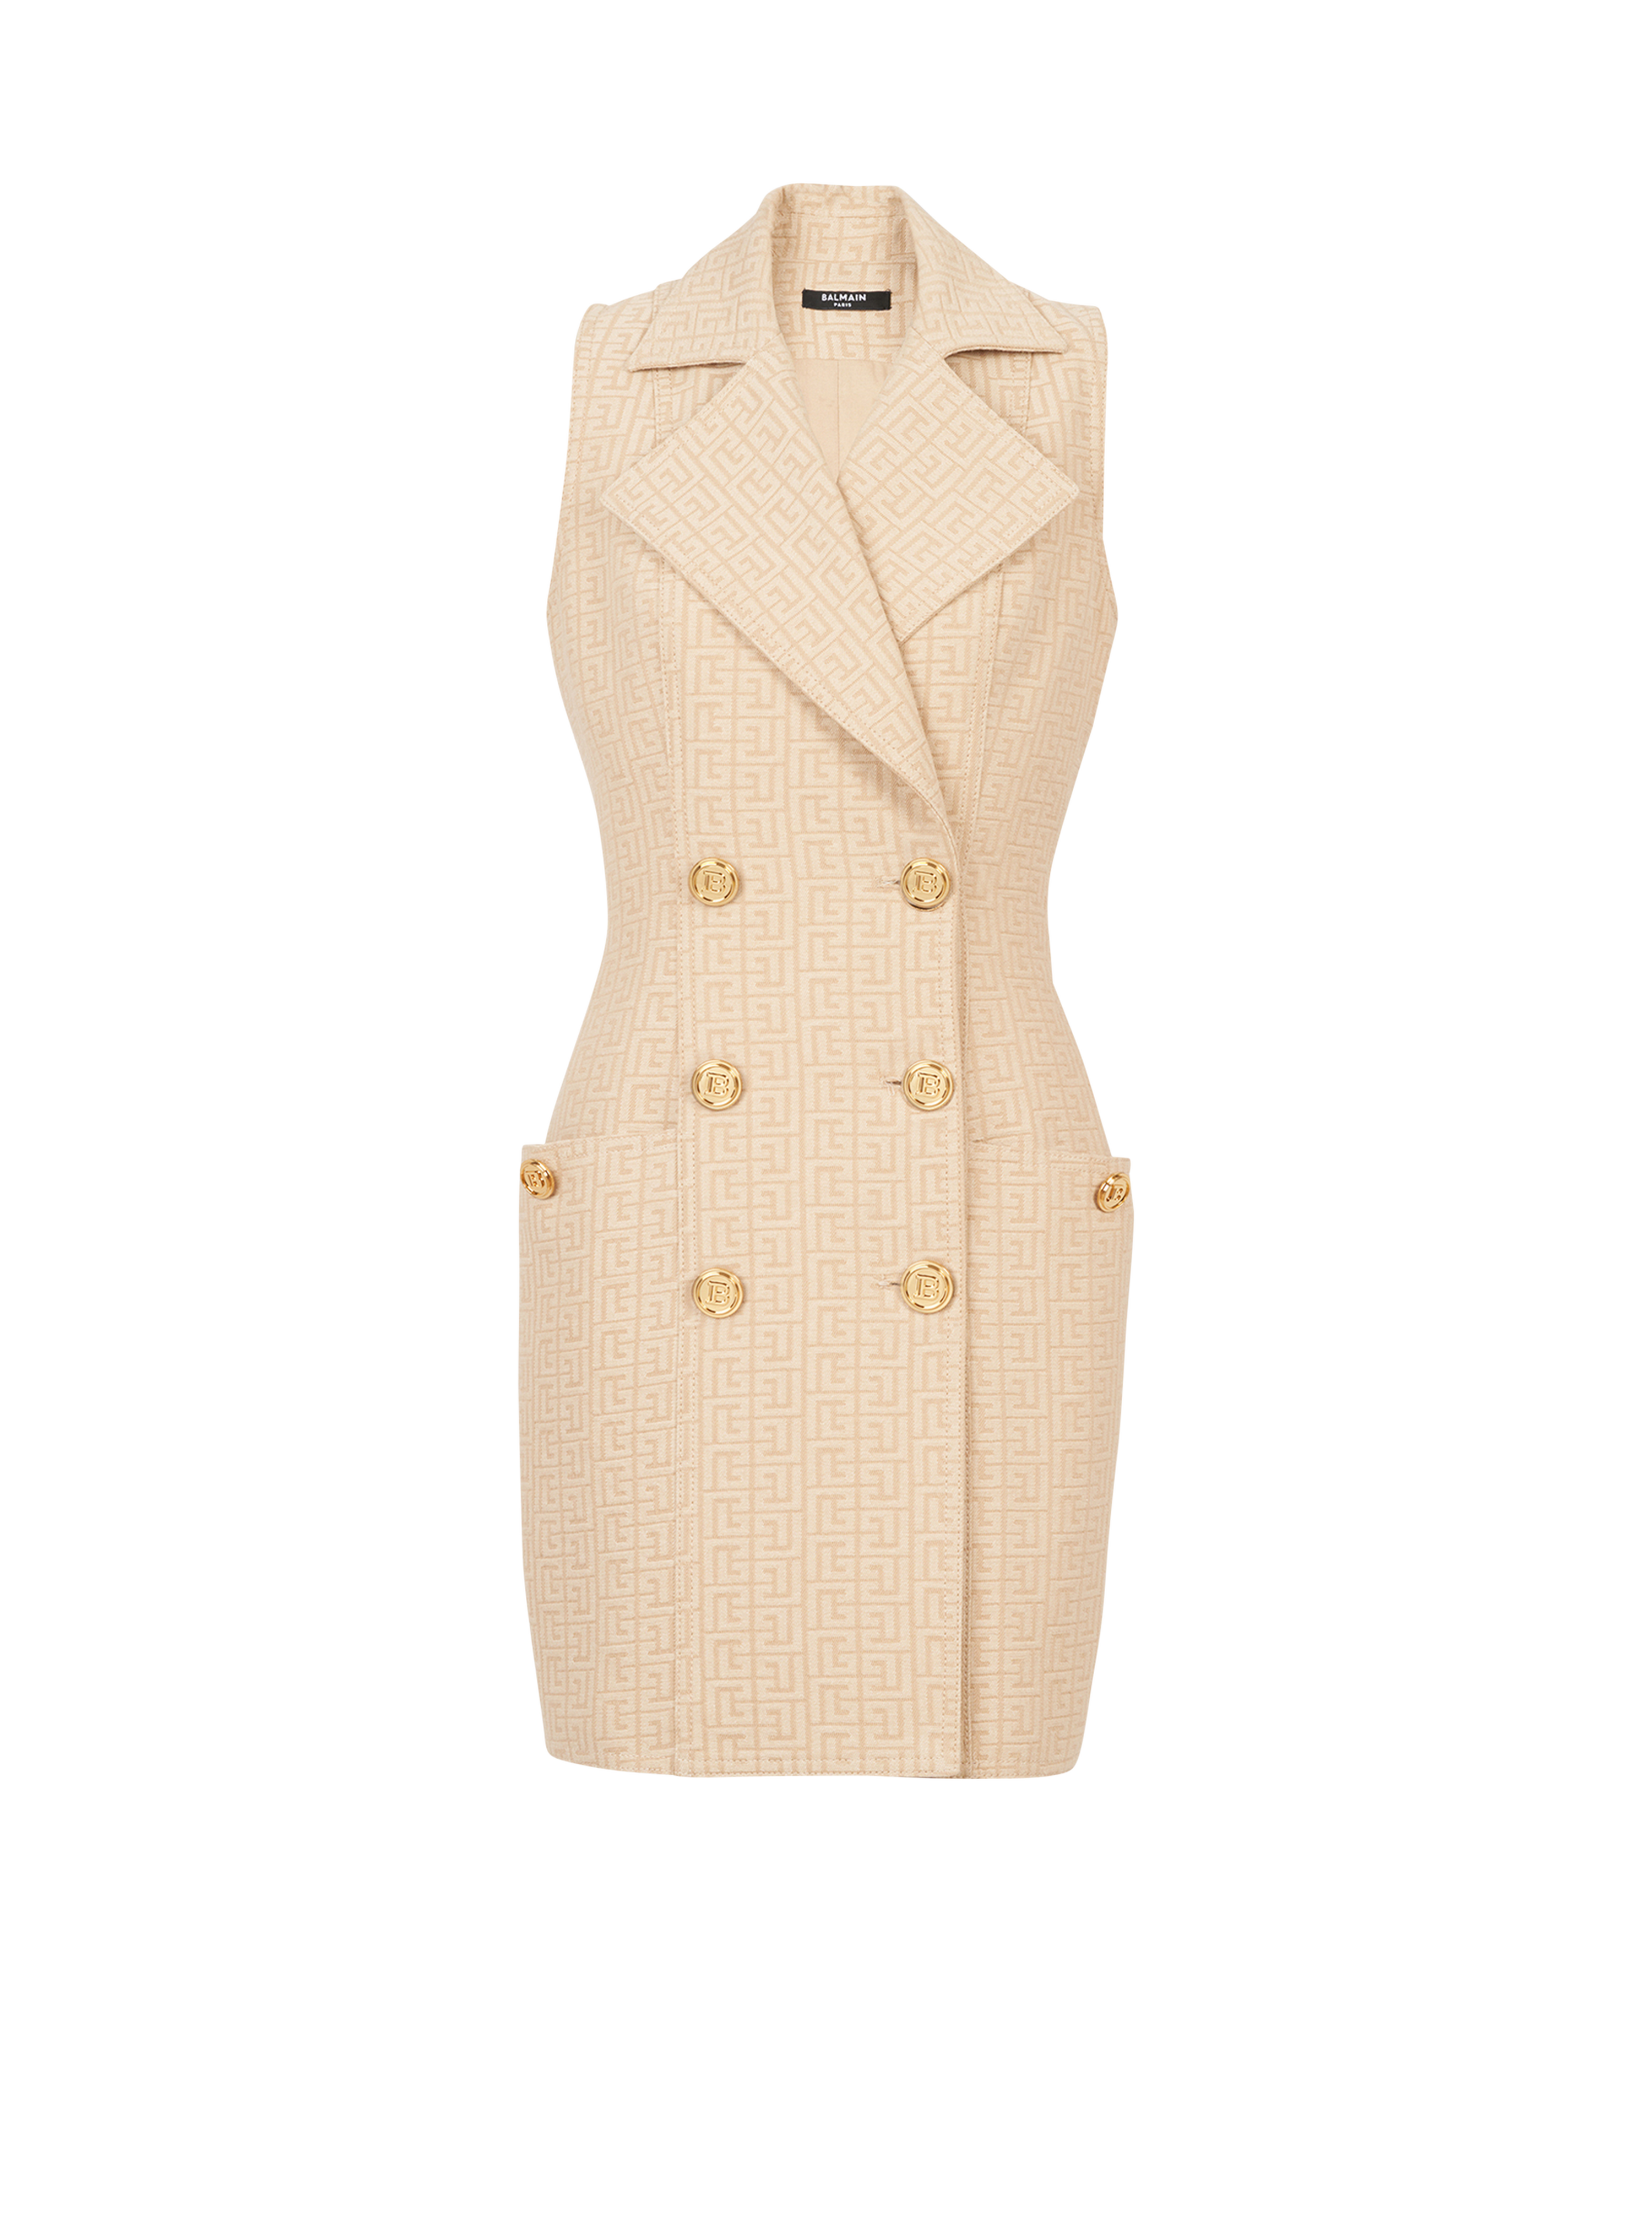 Short Balmain monogram jacquard dress with gold-tone double-buttoned fastening, beige